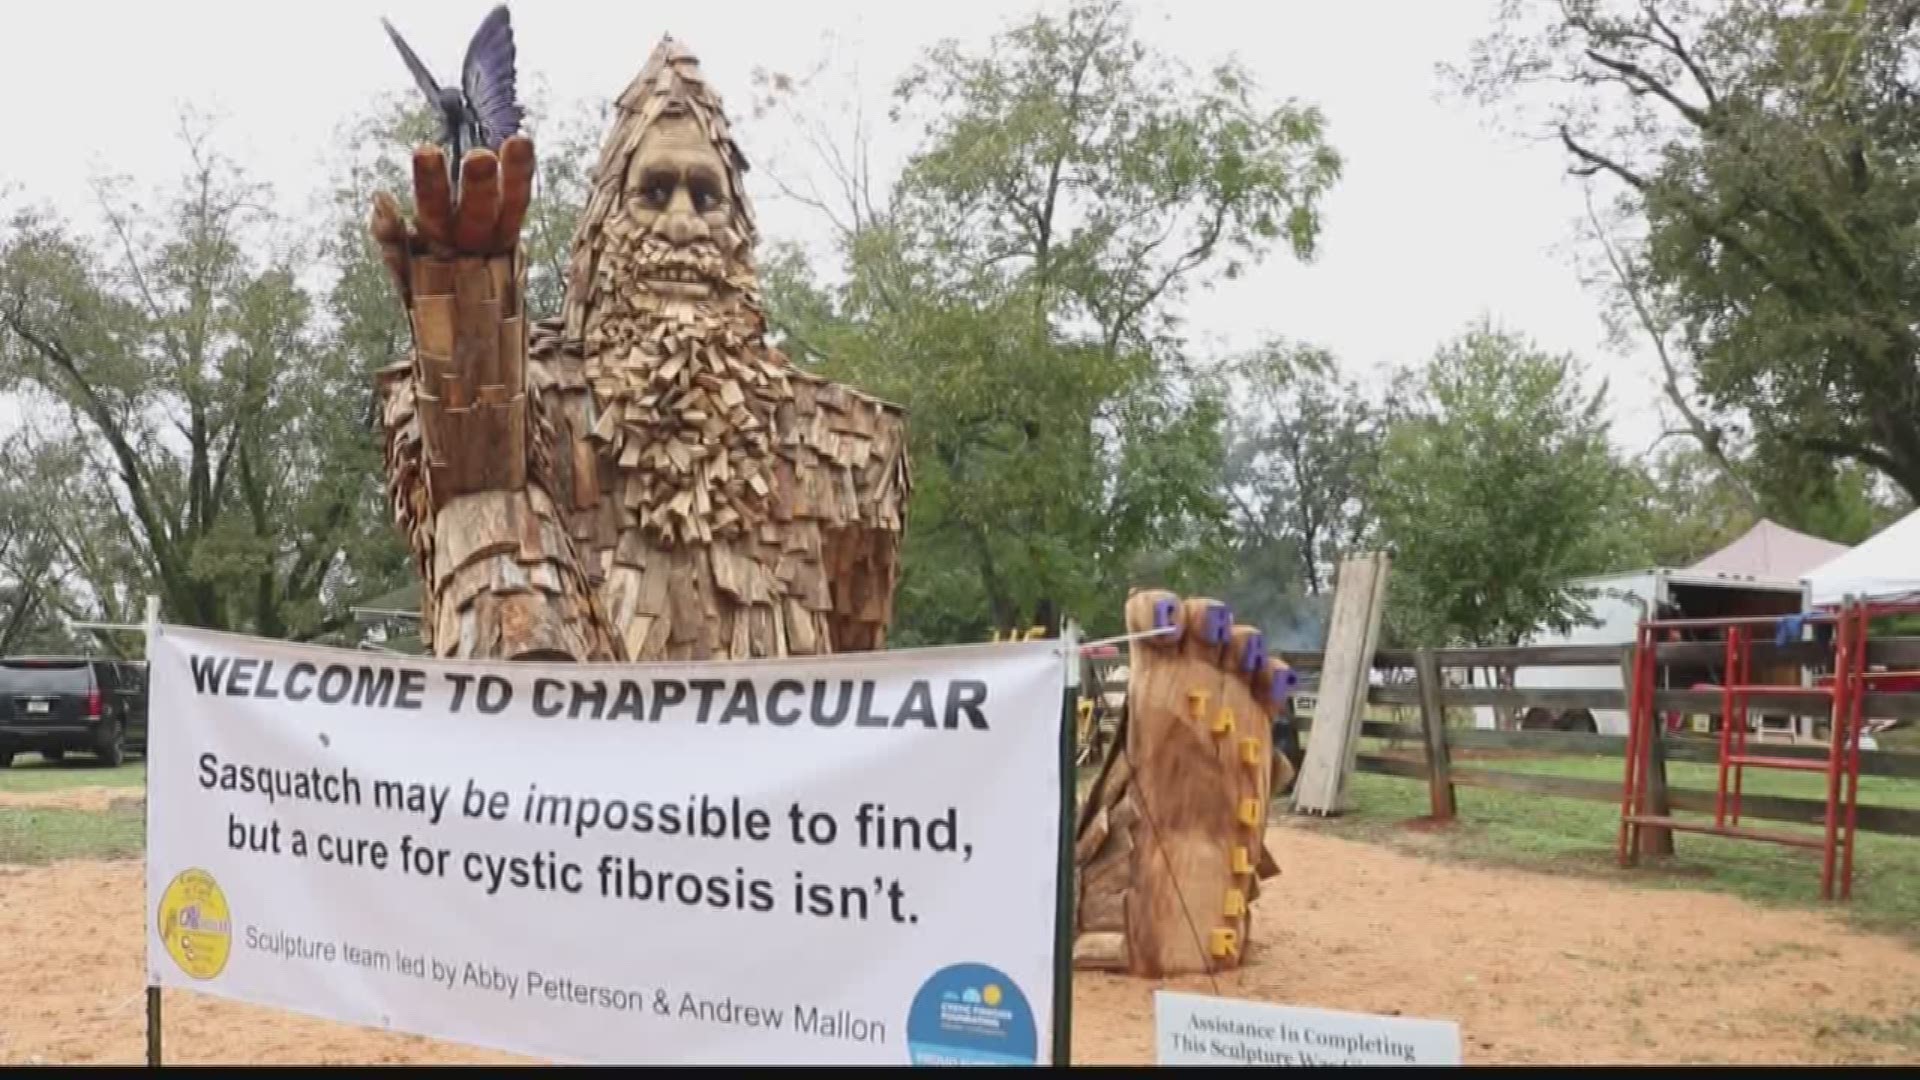 This weekend, over 70 pro woodcarvers from around the world are in Gray, Georgia for the Chaptacular Chainsaw Carving Bash.